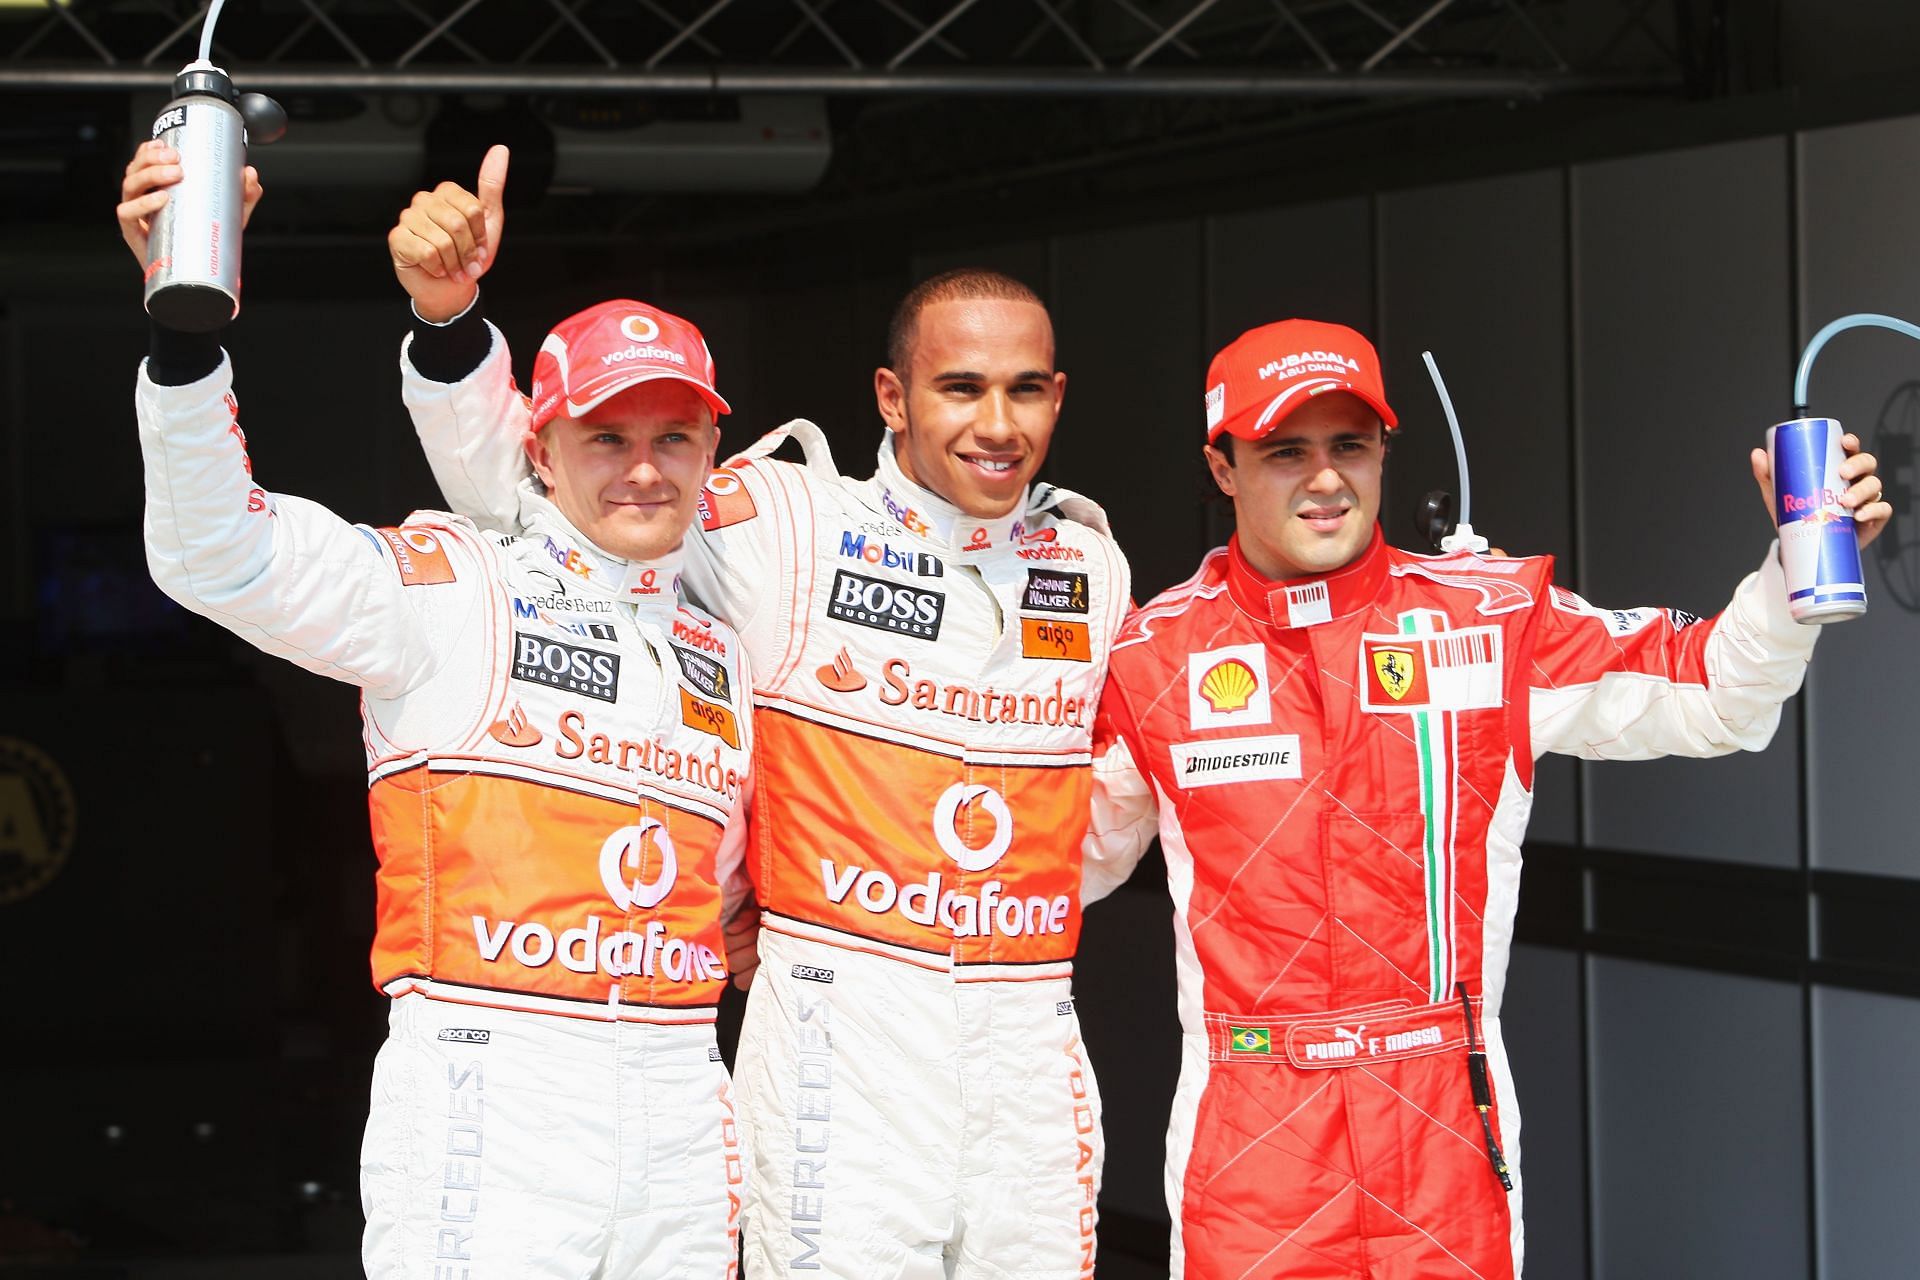 Heikki Kovalainen (left), Lewis Hamilton (center), and Felipe Massa (right) after qualifying for the 2008 Hungarian GP (Photo by Mark Thompson/Getty Images)